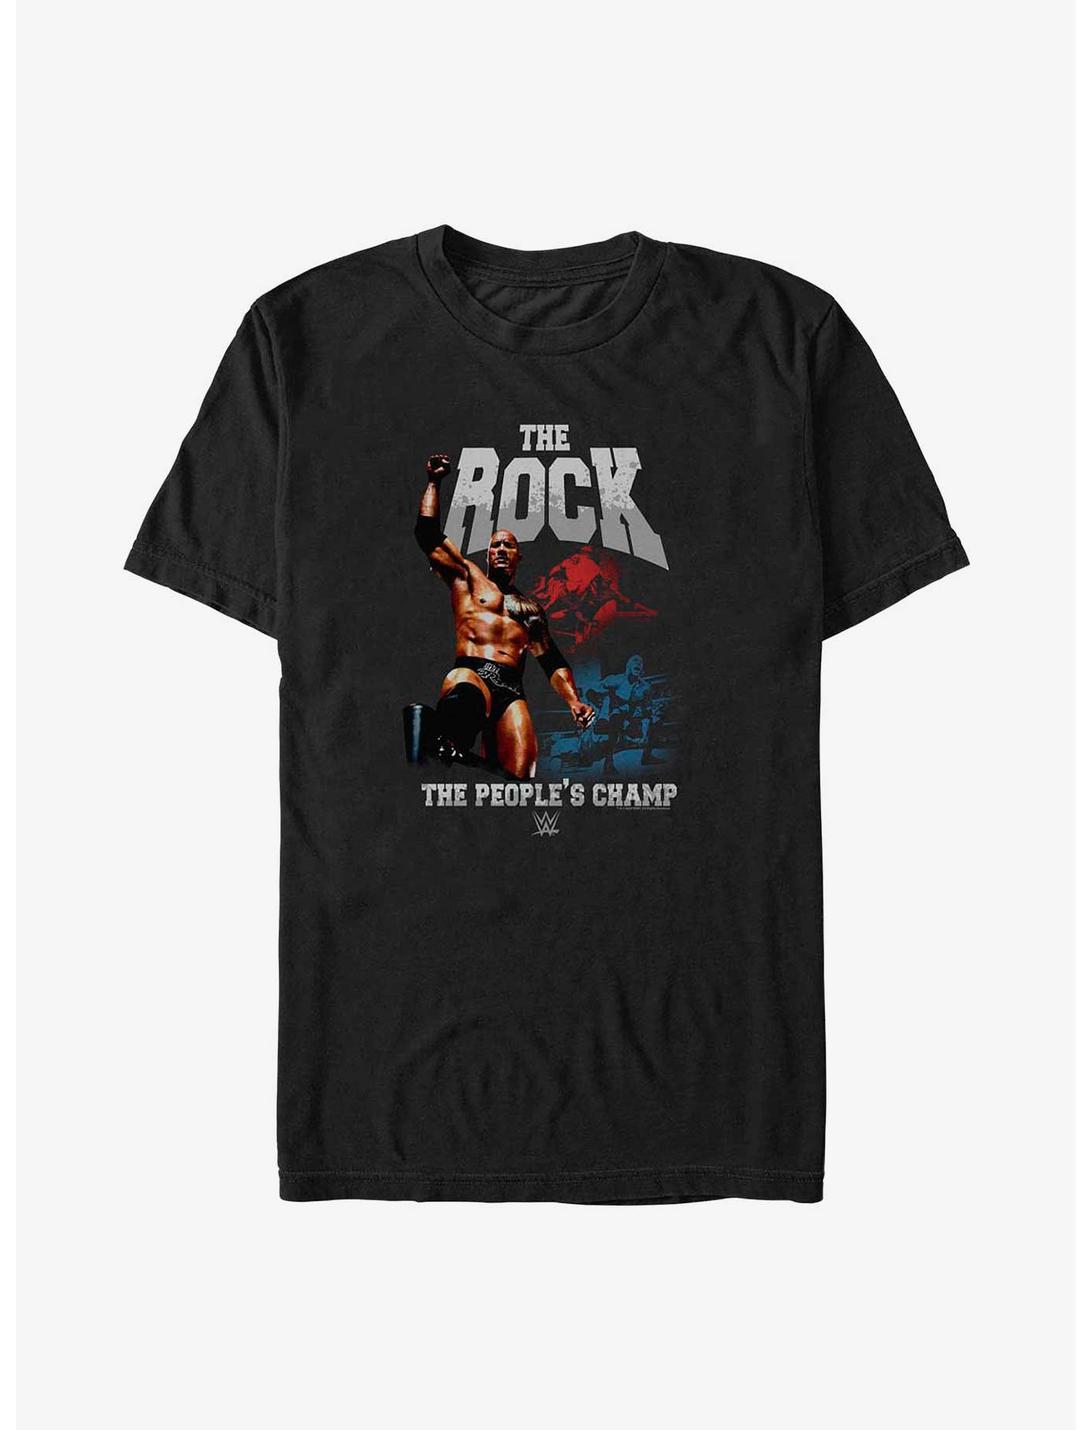 WWE The Rock The People's Champ T-Shirt, BLACK, hi-res